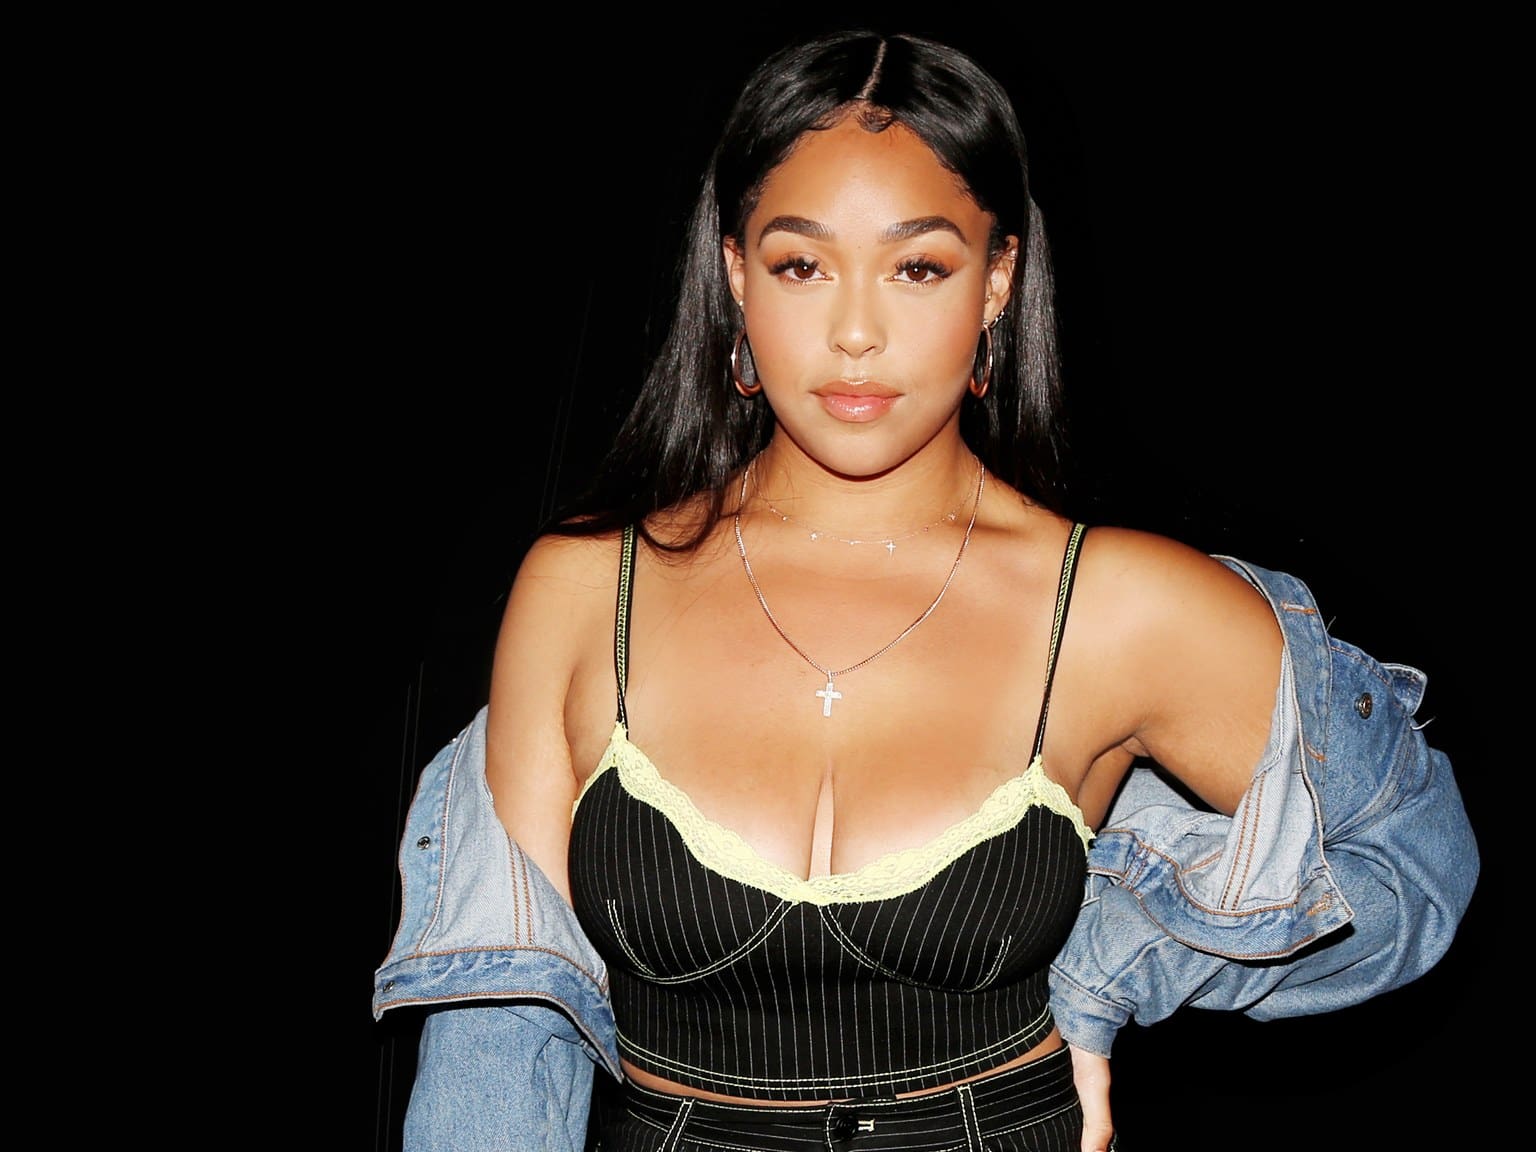 Jordyn Woods Filmed Out For The First Time Since The Cheating Scandal - Watch The Video To See How She's Doing